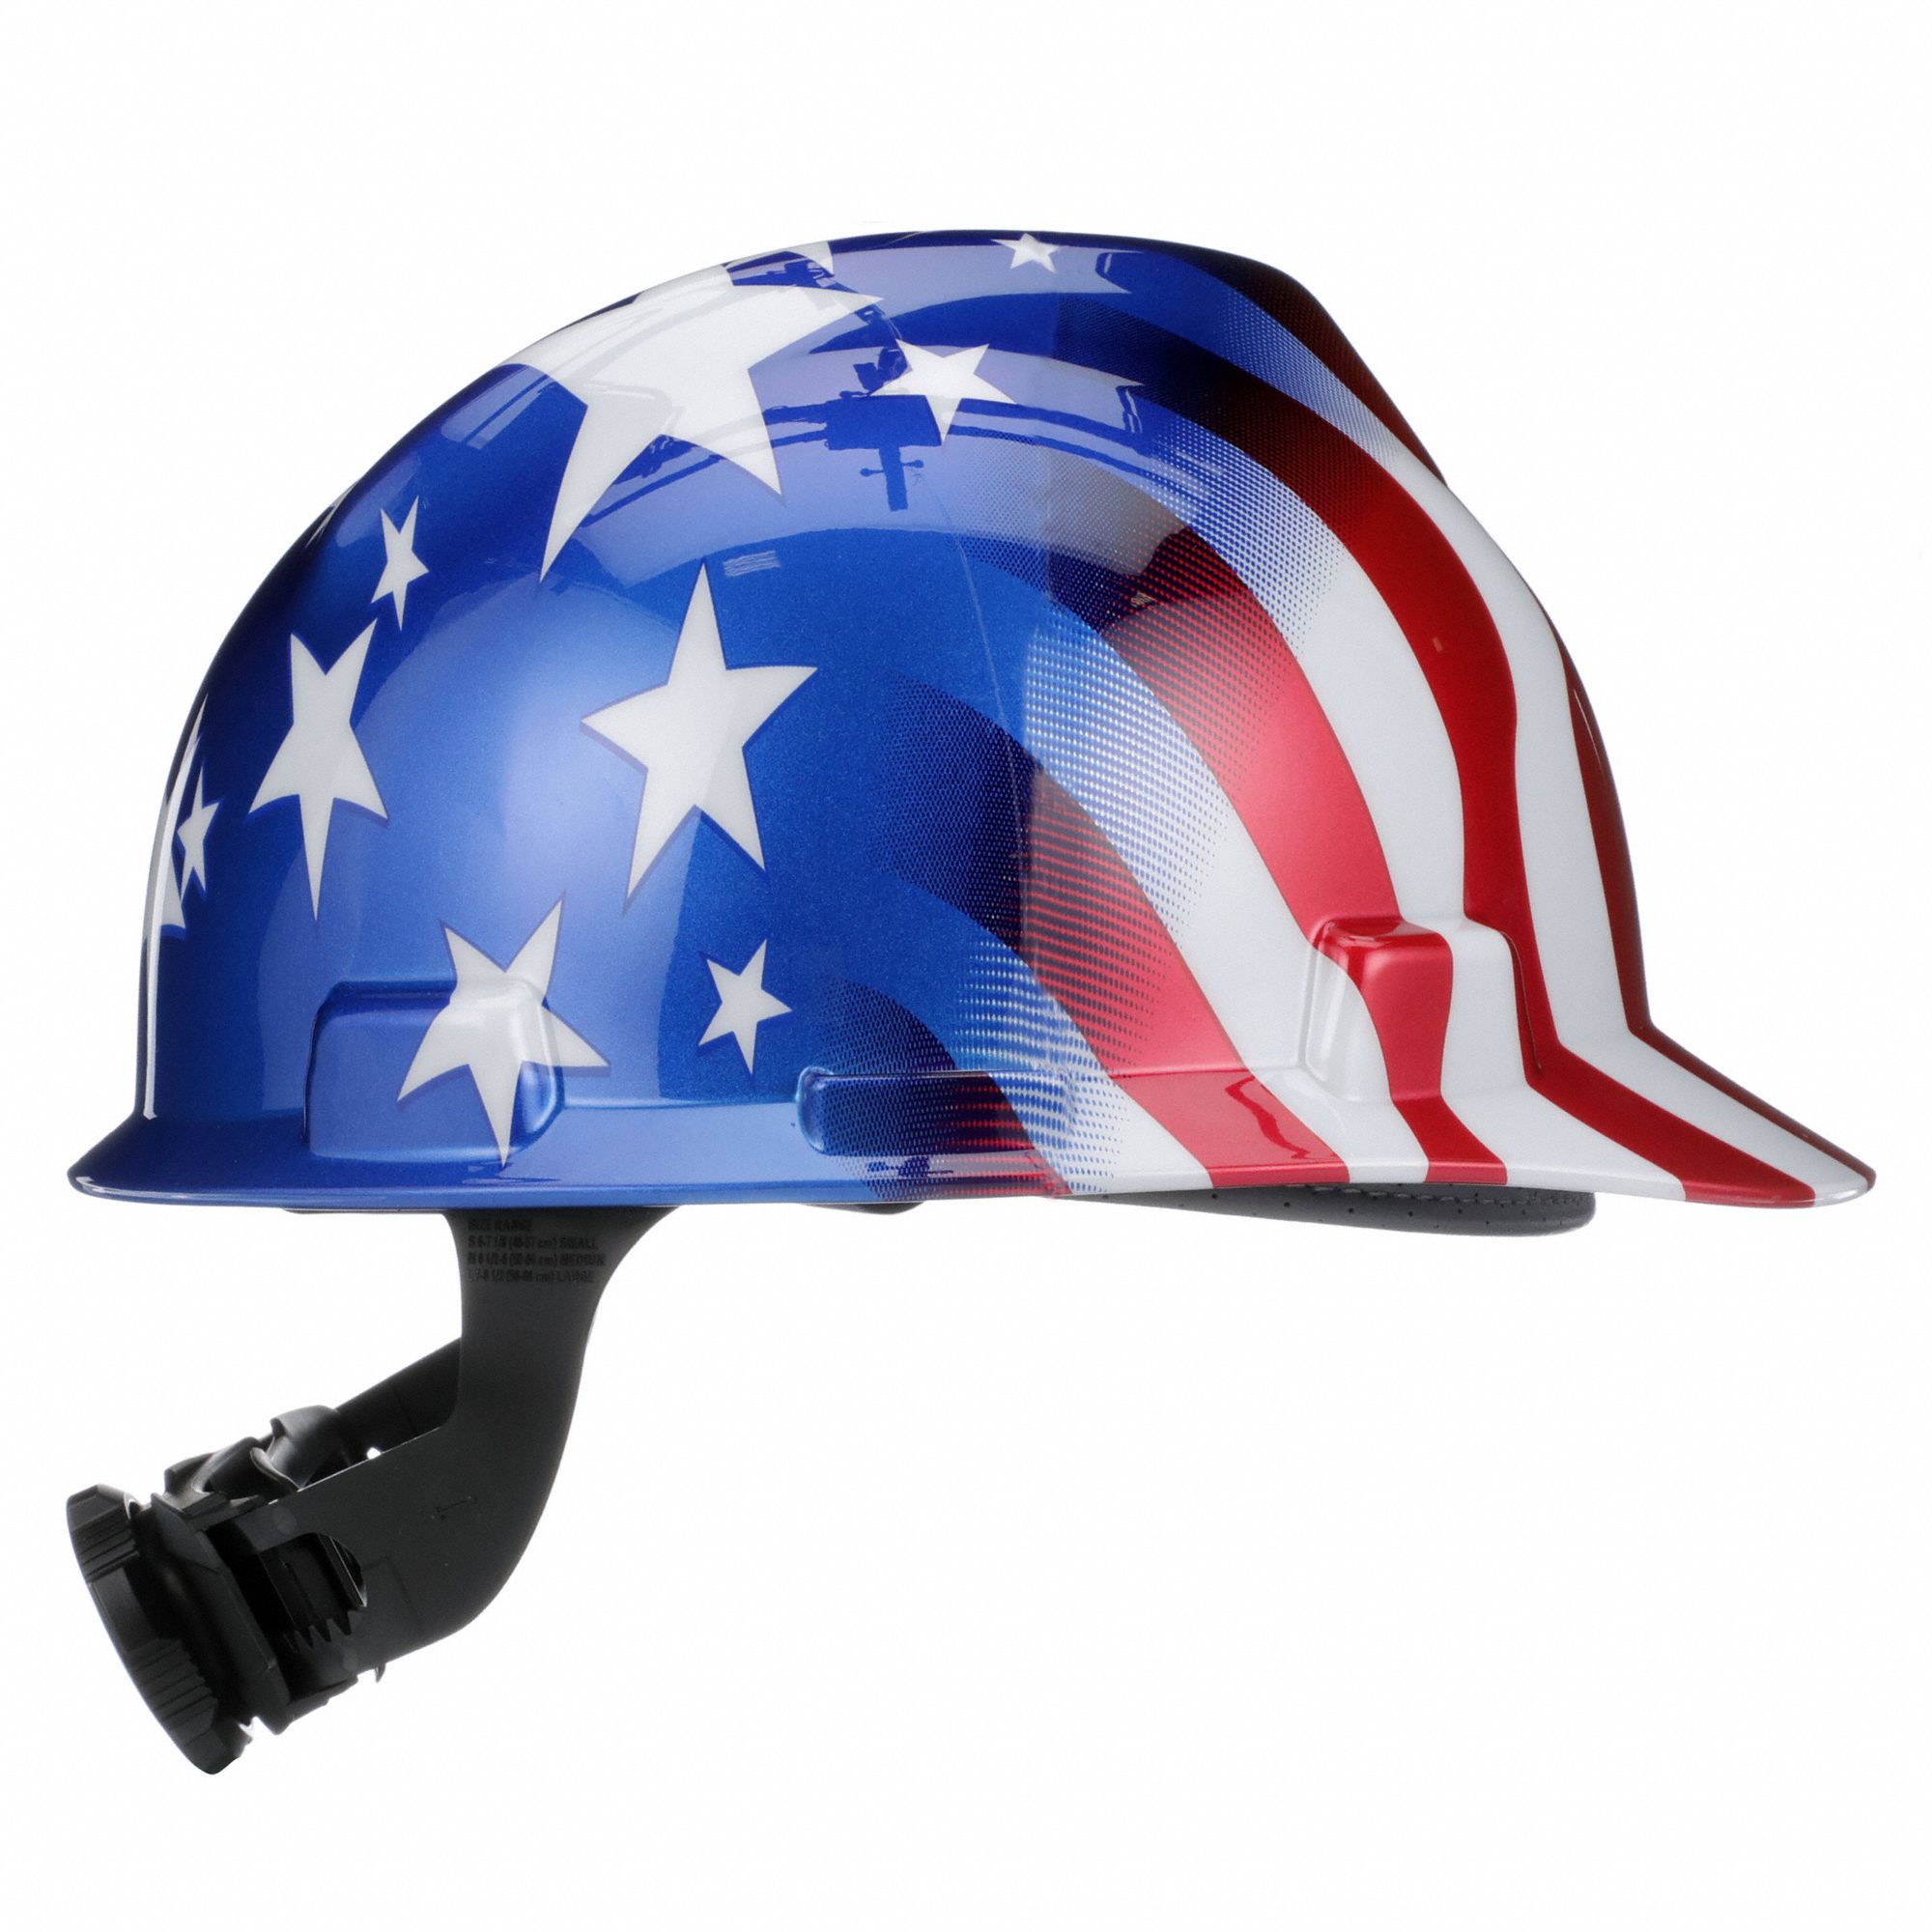 MSA Safety Works 10052945 USA Patriotic Hard Hat by Safety Works 